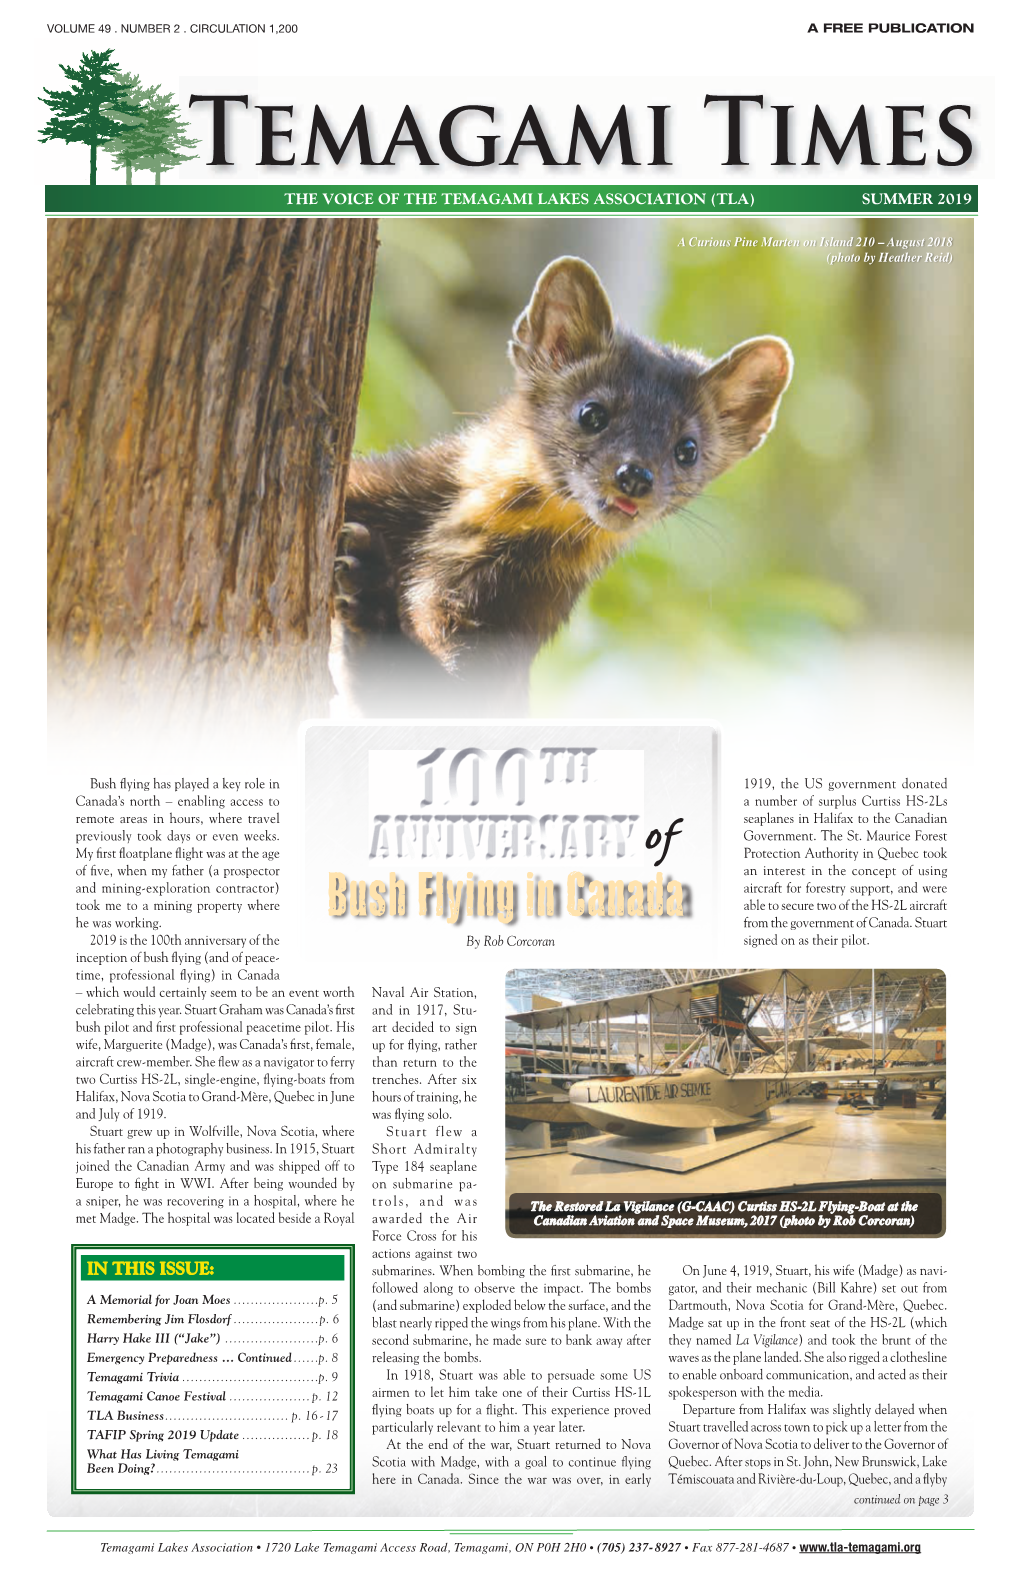 Temagami Times – Summer 2019